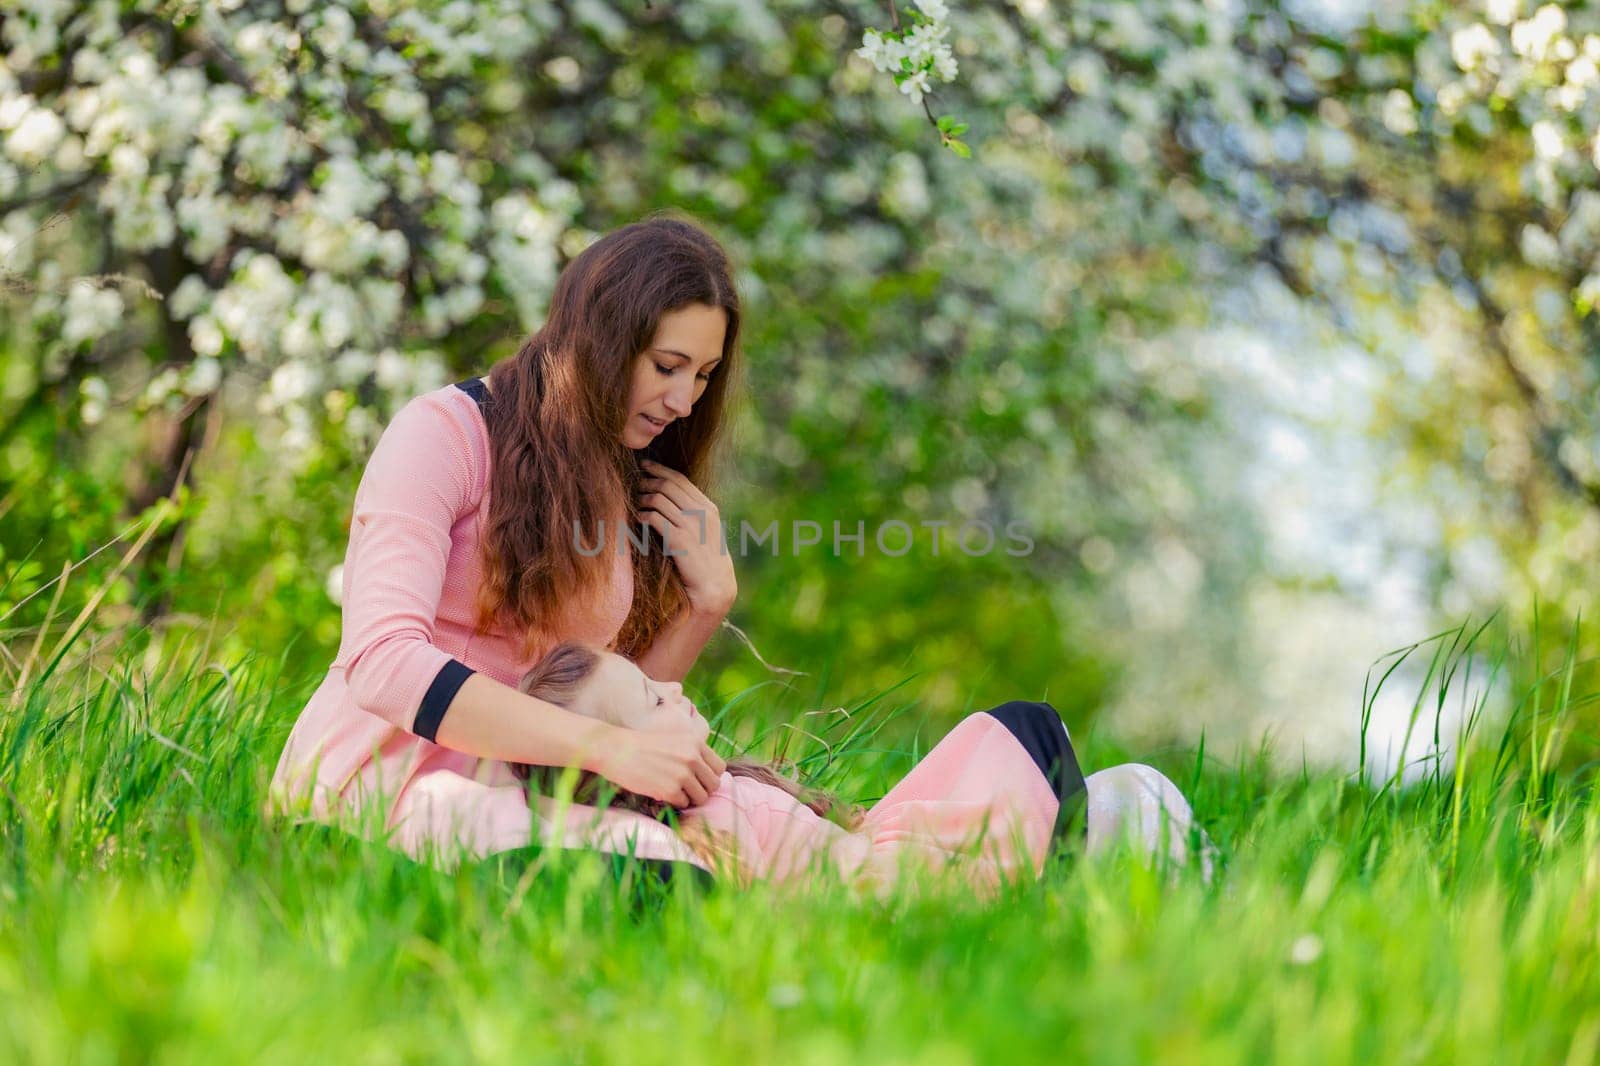 mother and daughter sit outdoors in a blooming garden